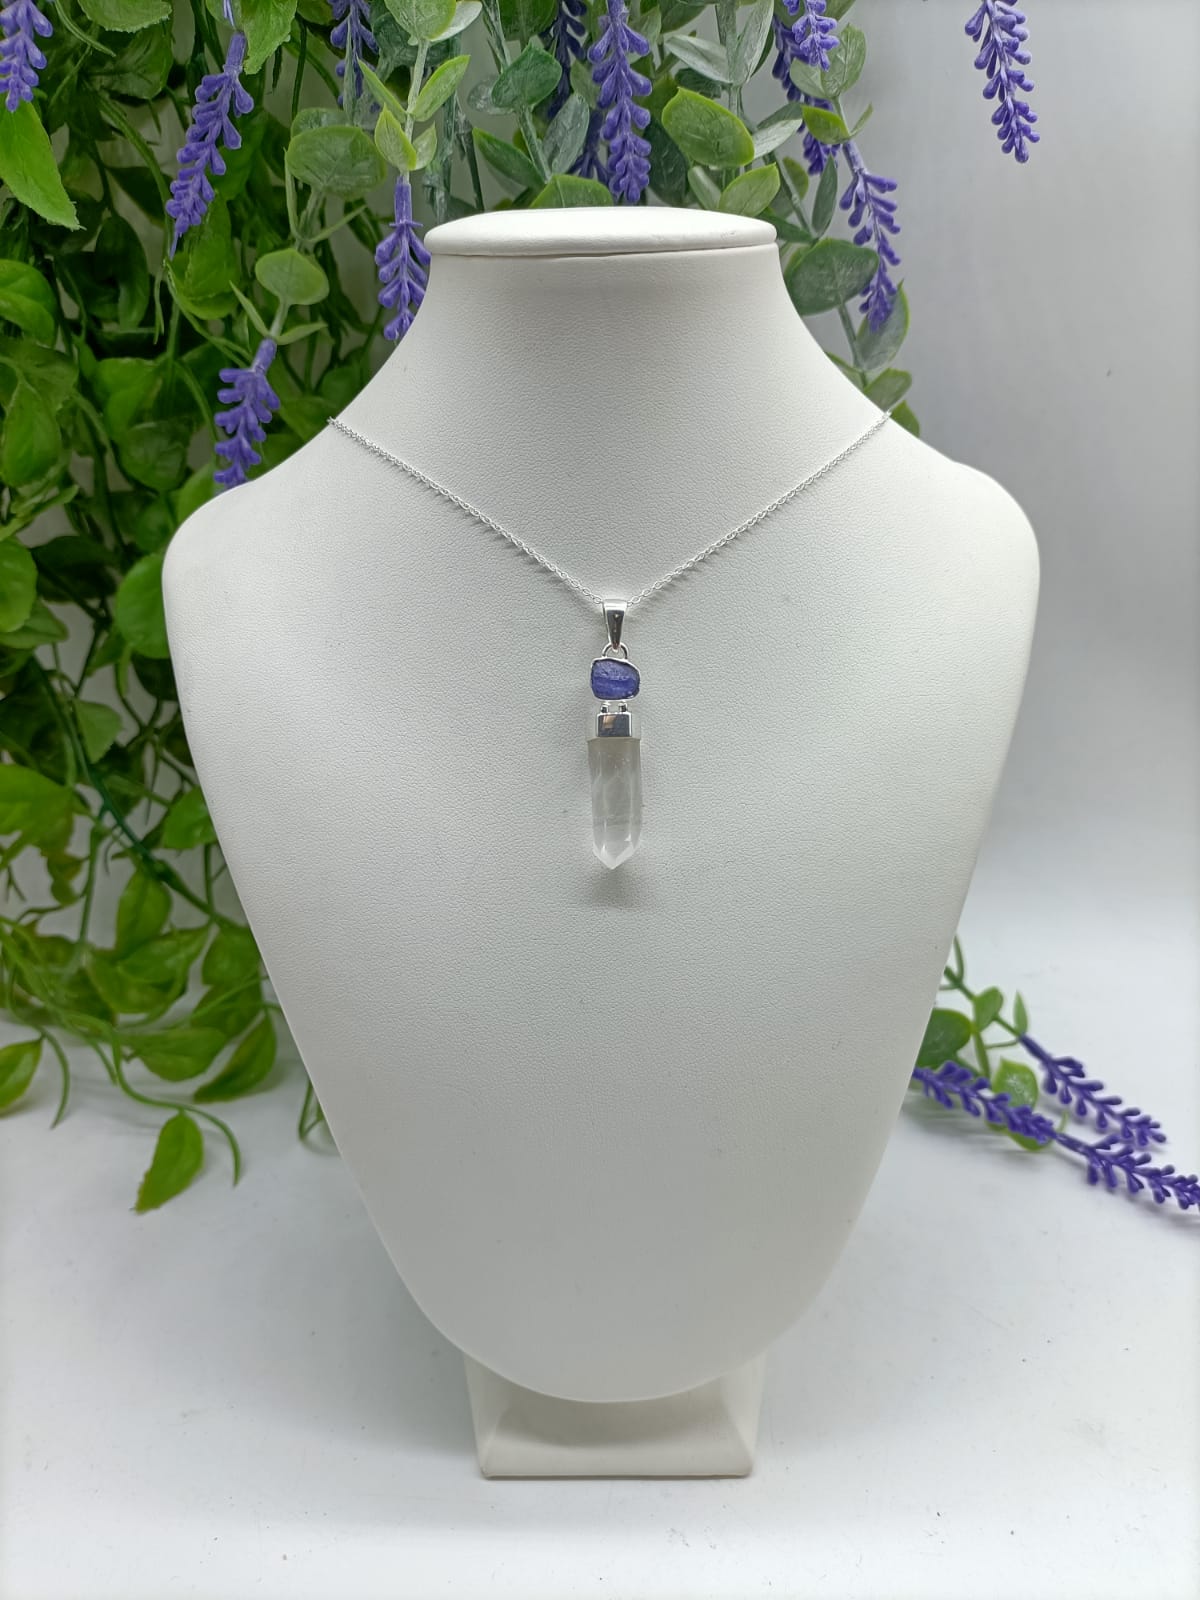 Lemurian and Tanzanite in 925 Sterling Silver Pendant 34x9mm (Chain Included)

